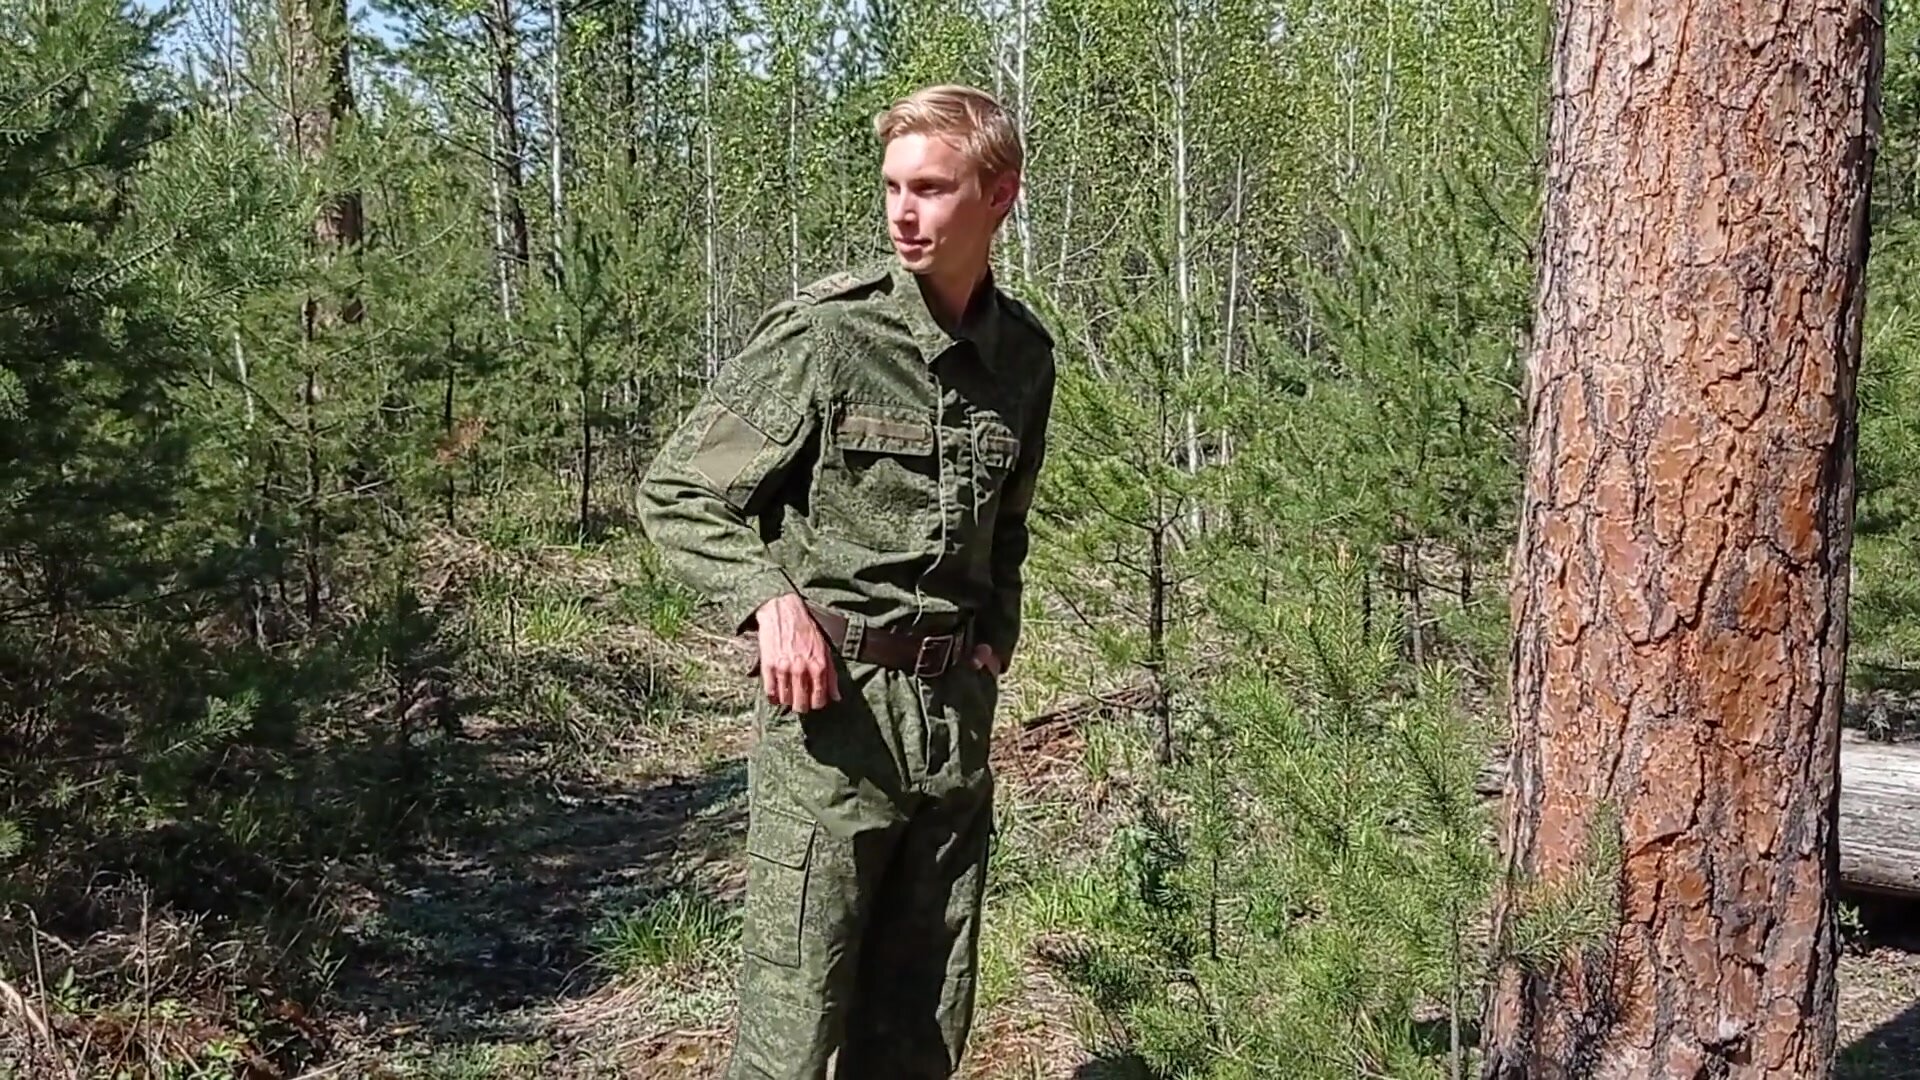 Twink Russian soldier's outdoor stroking